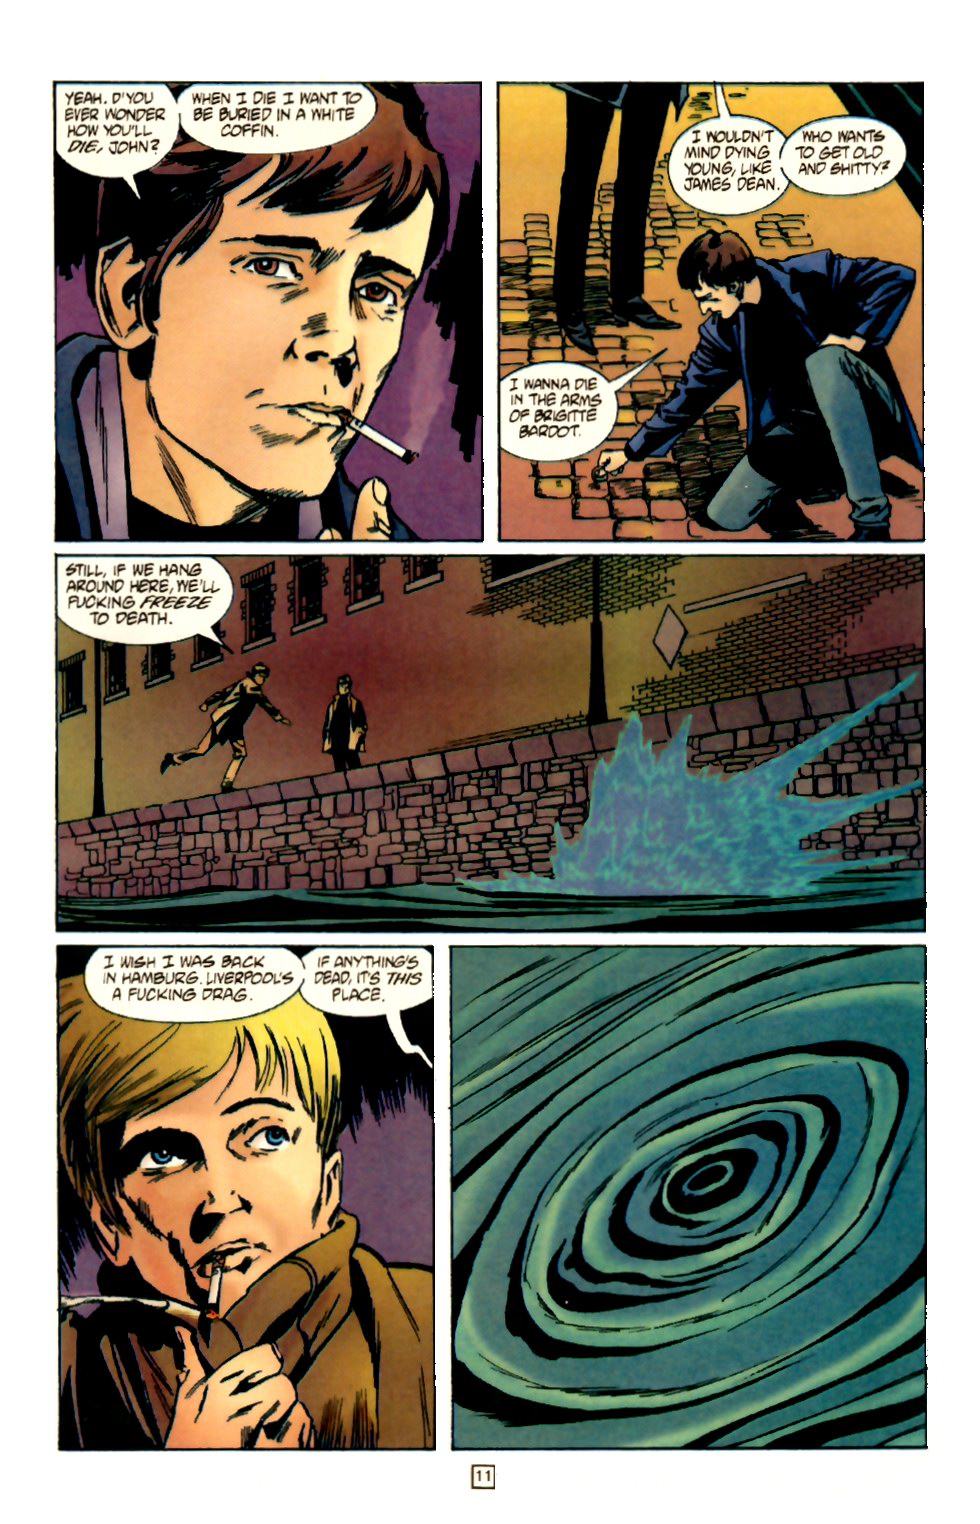 [The+Invisibles+#1+pg11.jpg]